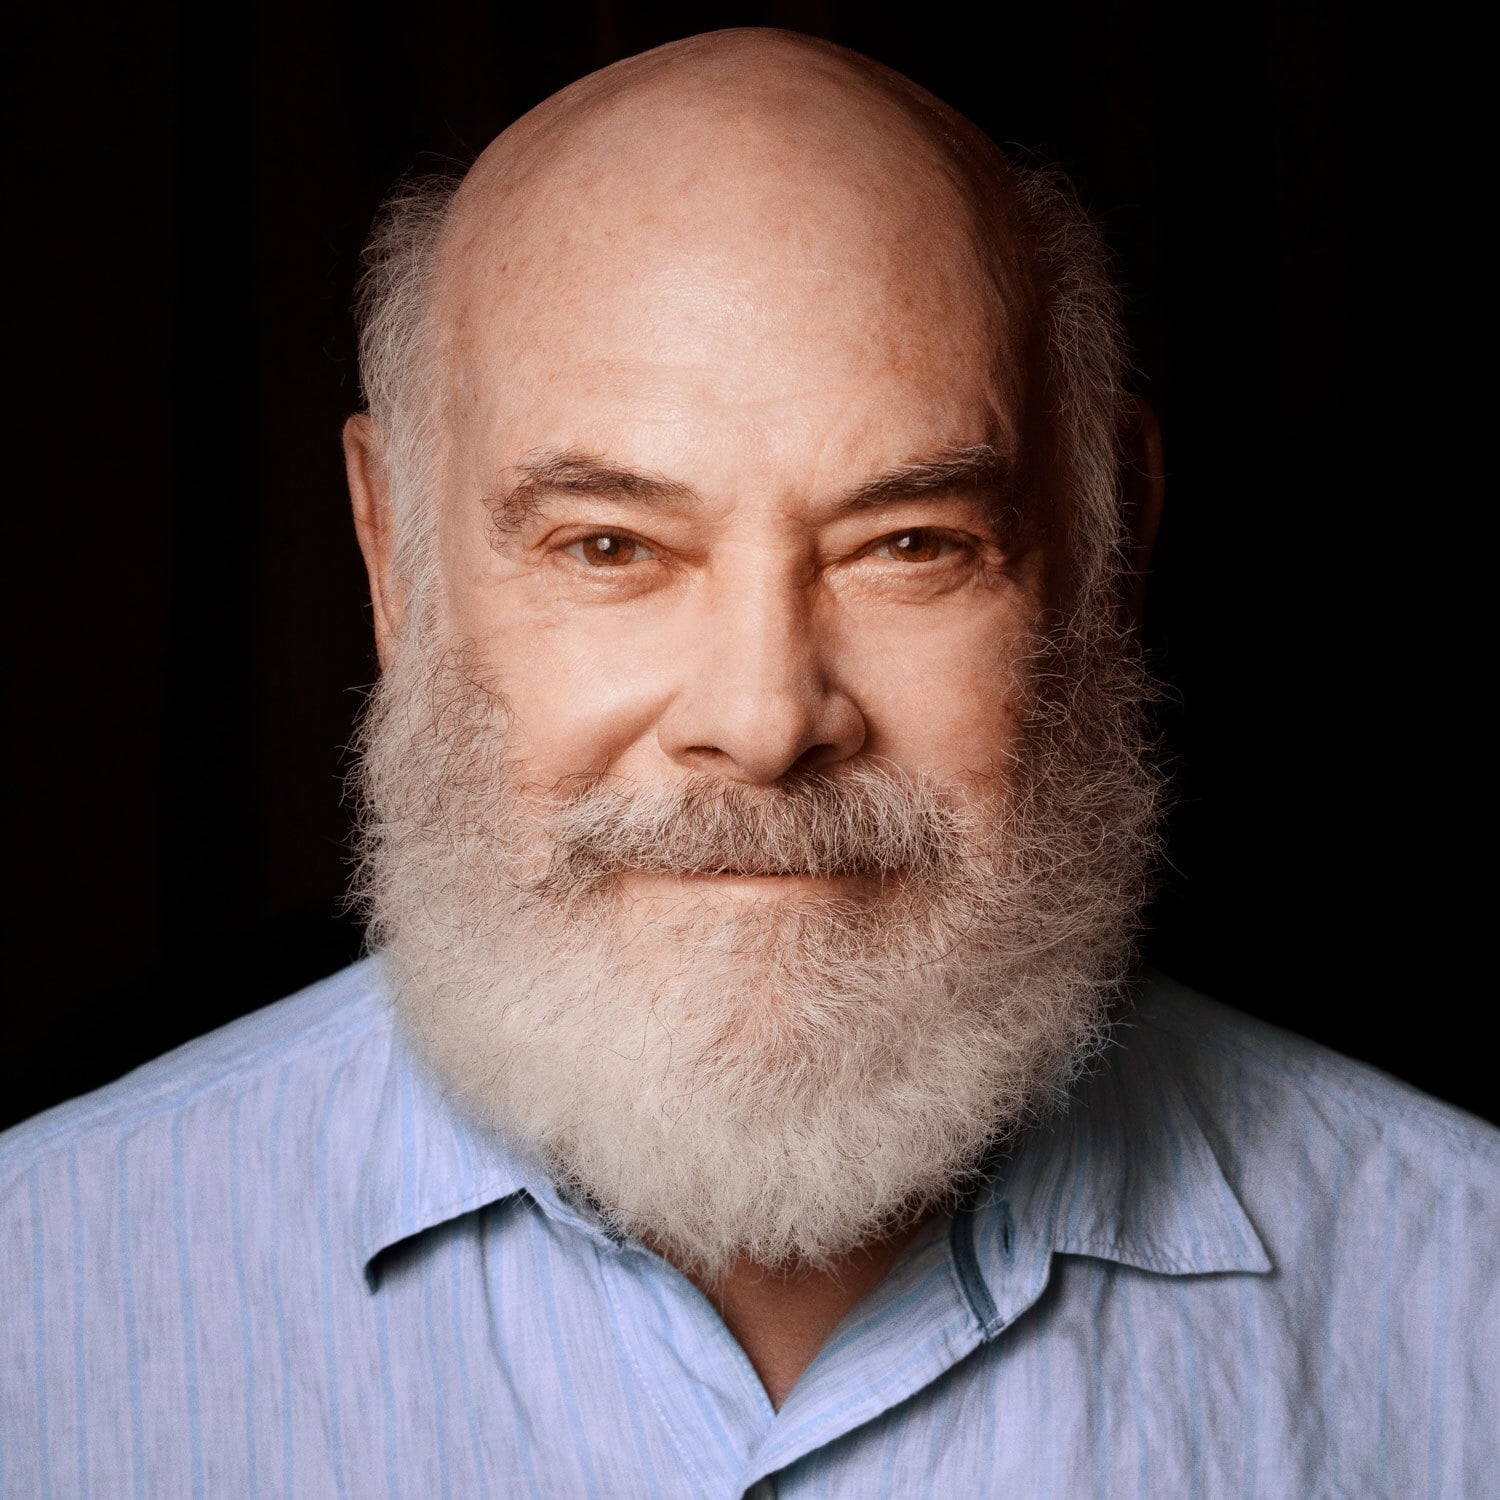 Dr. Weil's Perspective